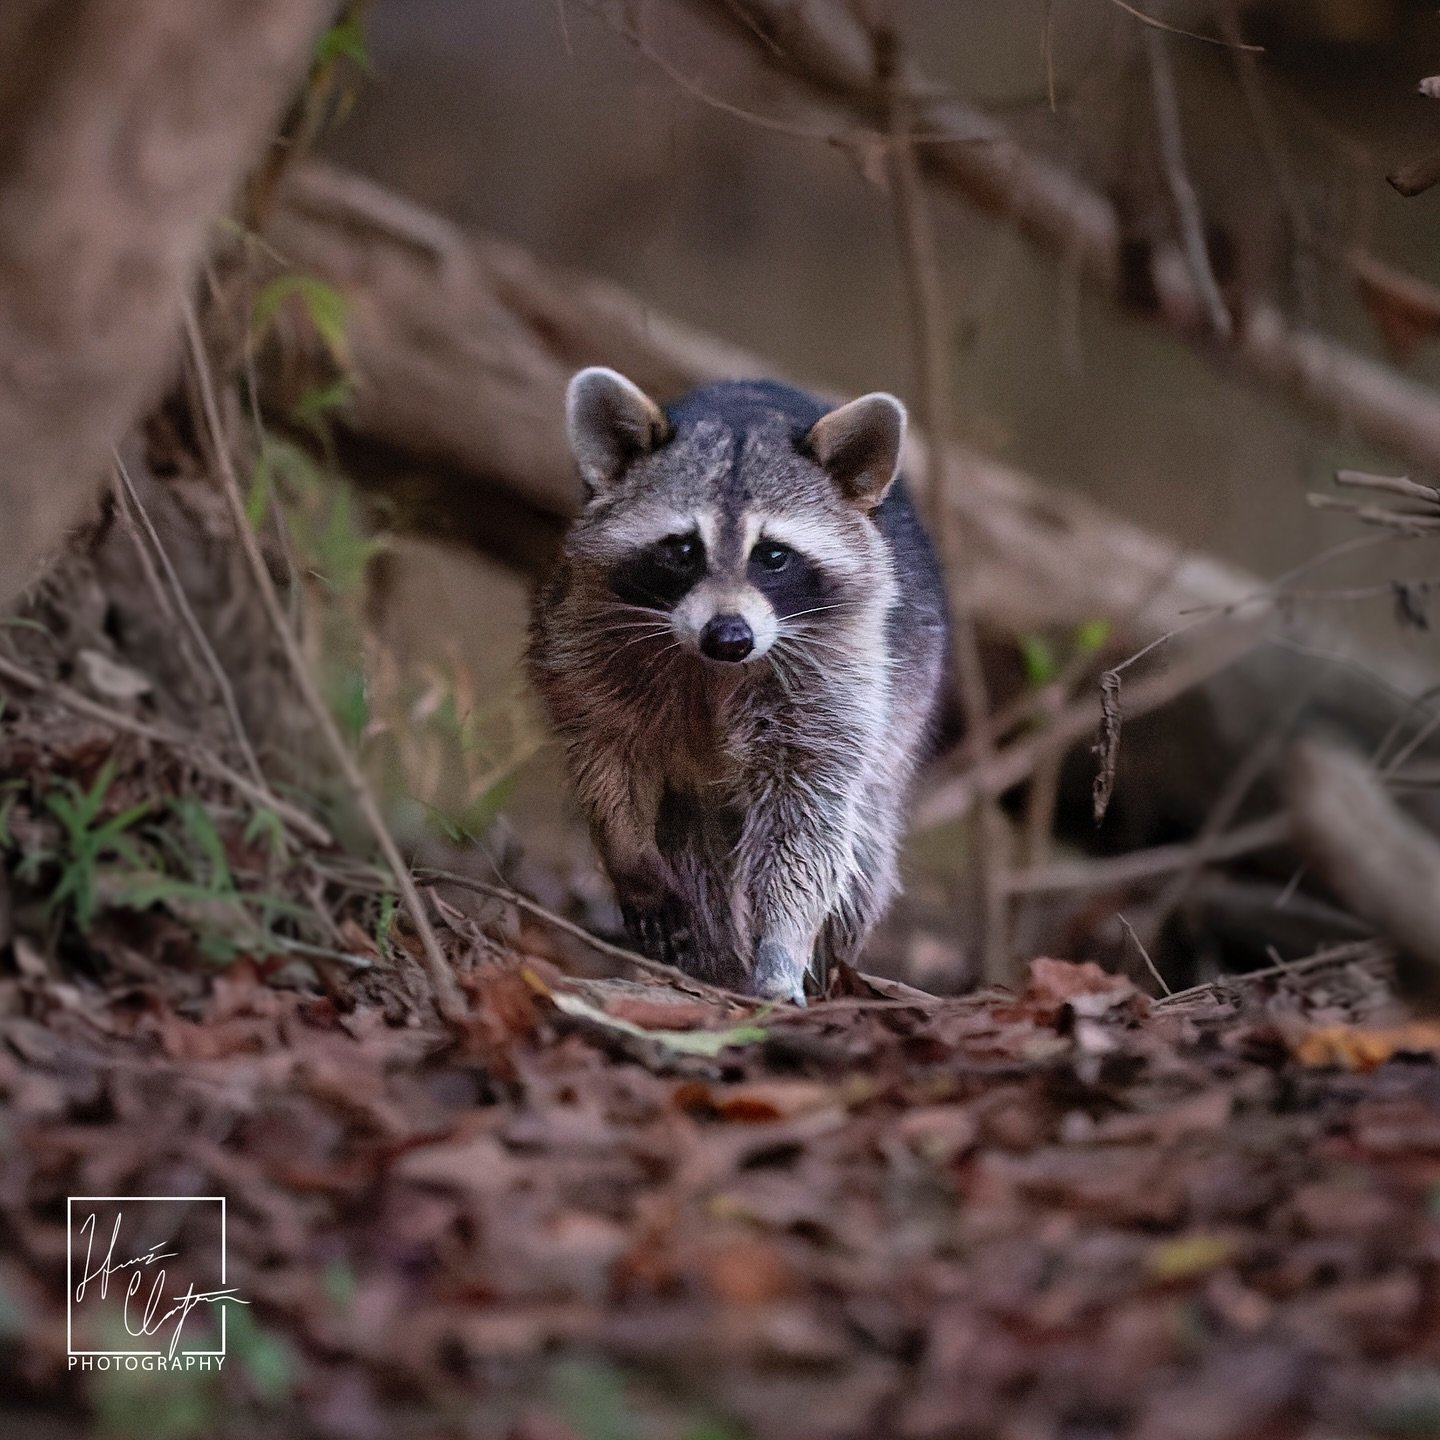 This raccoon almost walked into my lap while I sat on the bank of the Chattahoochee River. 

A few years back I was sitting on the bank of the river waiting for something to photograph. As darkness fell I heard something walking towards me and when I